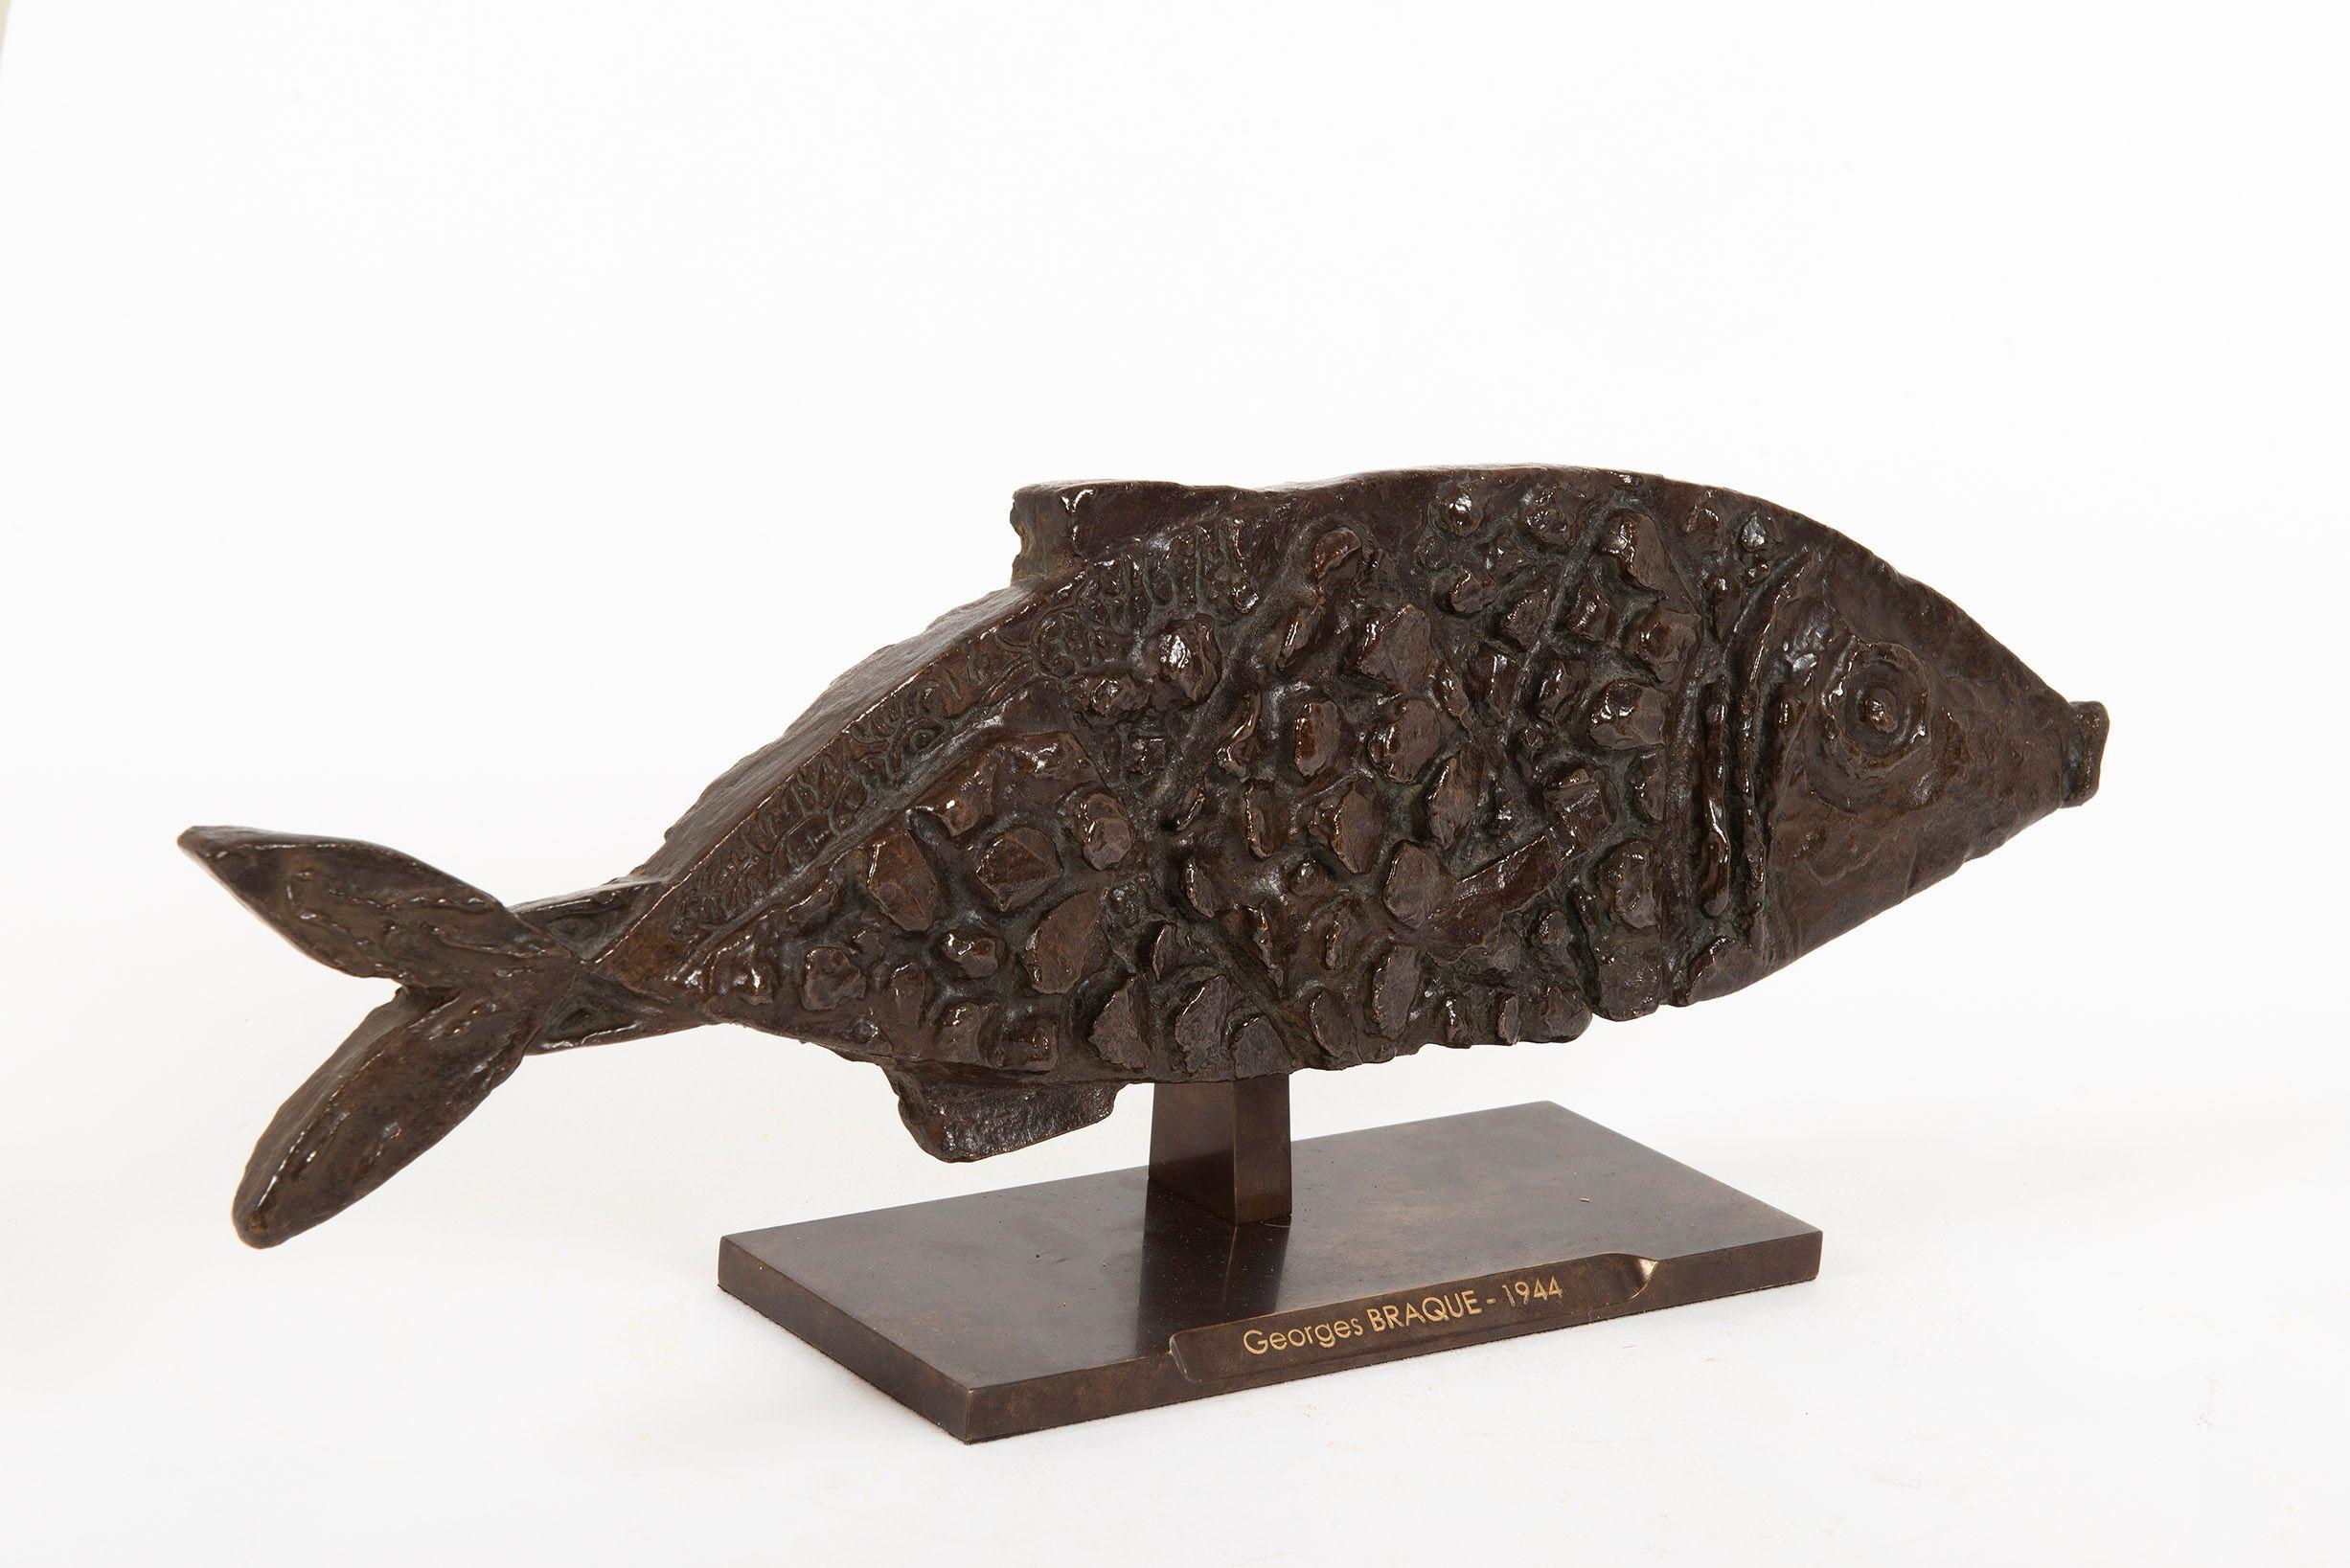 Poisson, Georges Braque, Fish, Sculpture, Bronze, 1940's, Postwar, Valsuani

Ed. 6/6 pcs
Signed and numbered underneath : 6/6, cire perdue, C.Valsuani fondeur.
Certificate of authenticity issued by Quentin Laurens from the Louise Leiris